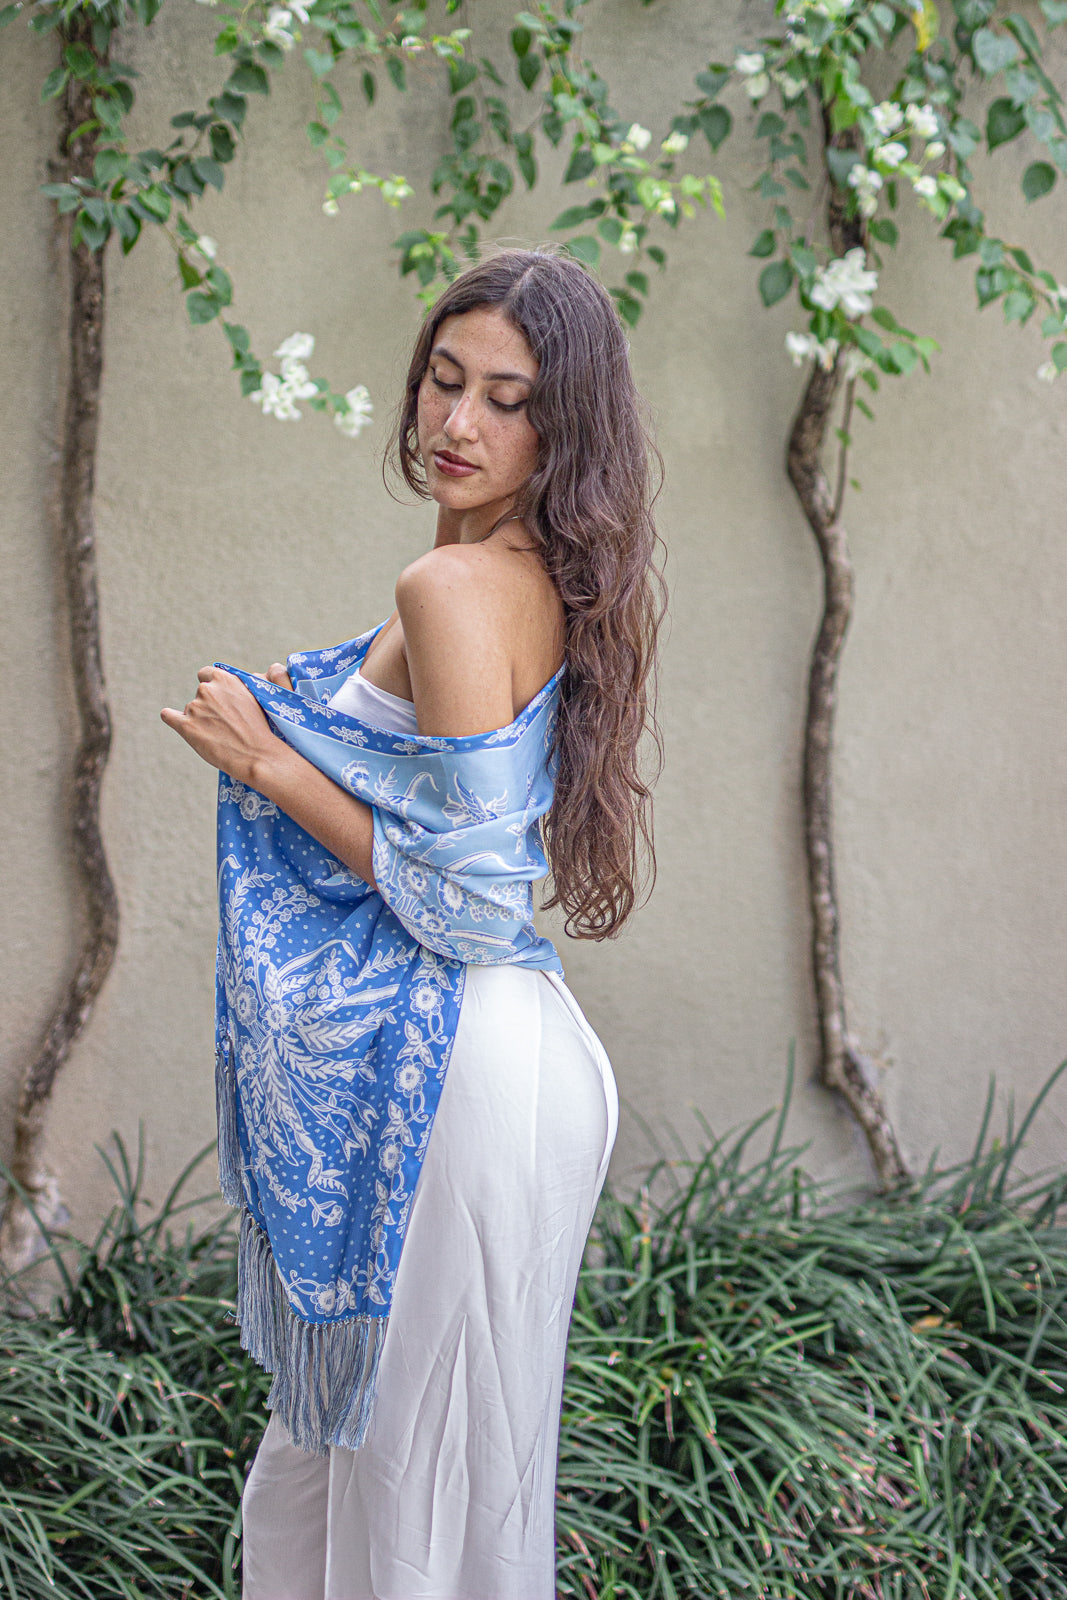 Shawl In Blue in Model 3rd Pose